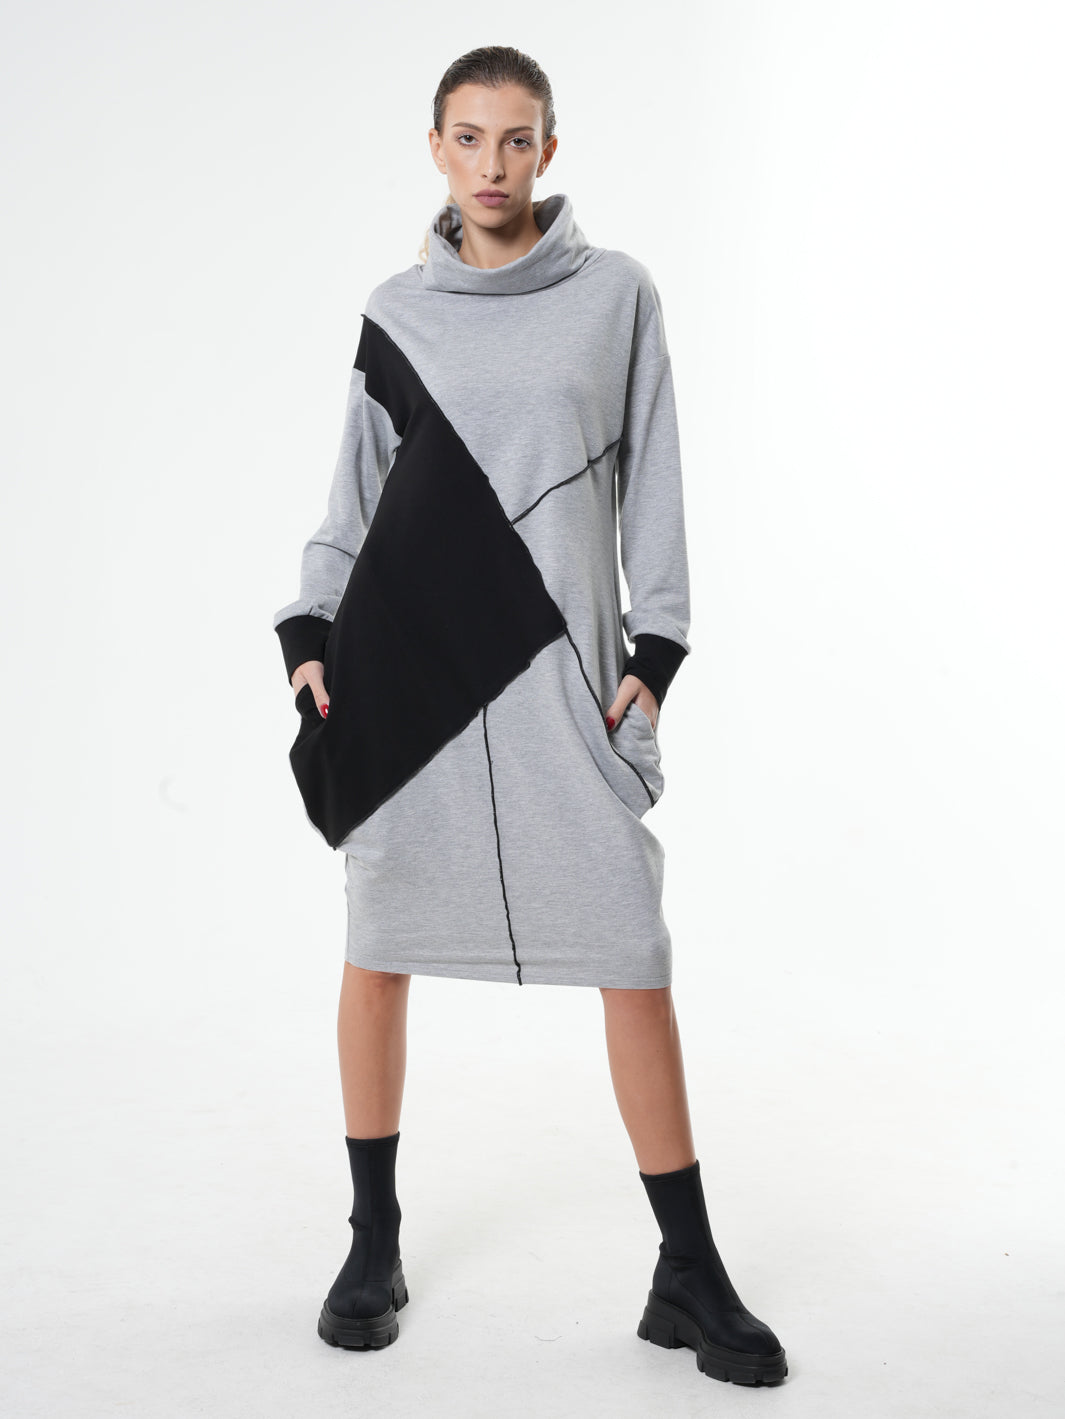 Long Sleeve Cotton Dress With Turtleneck In Gray